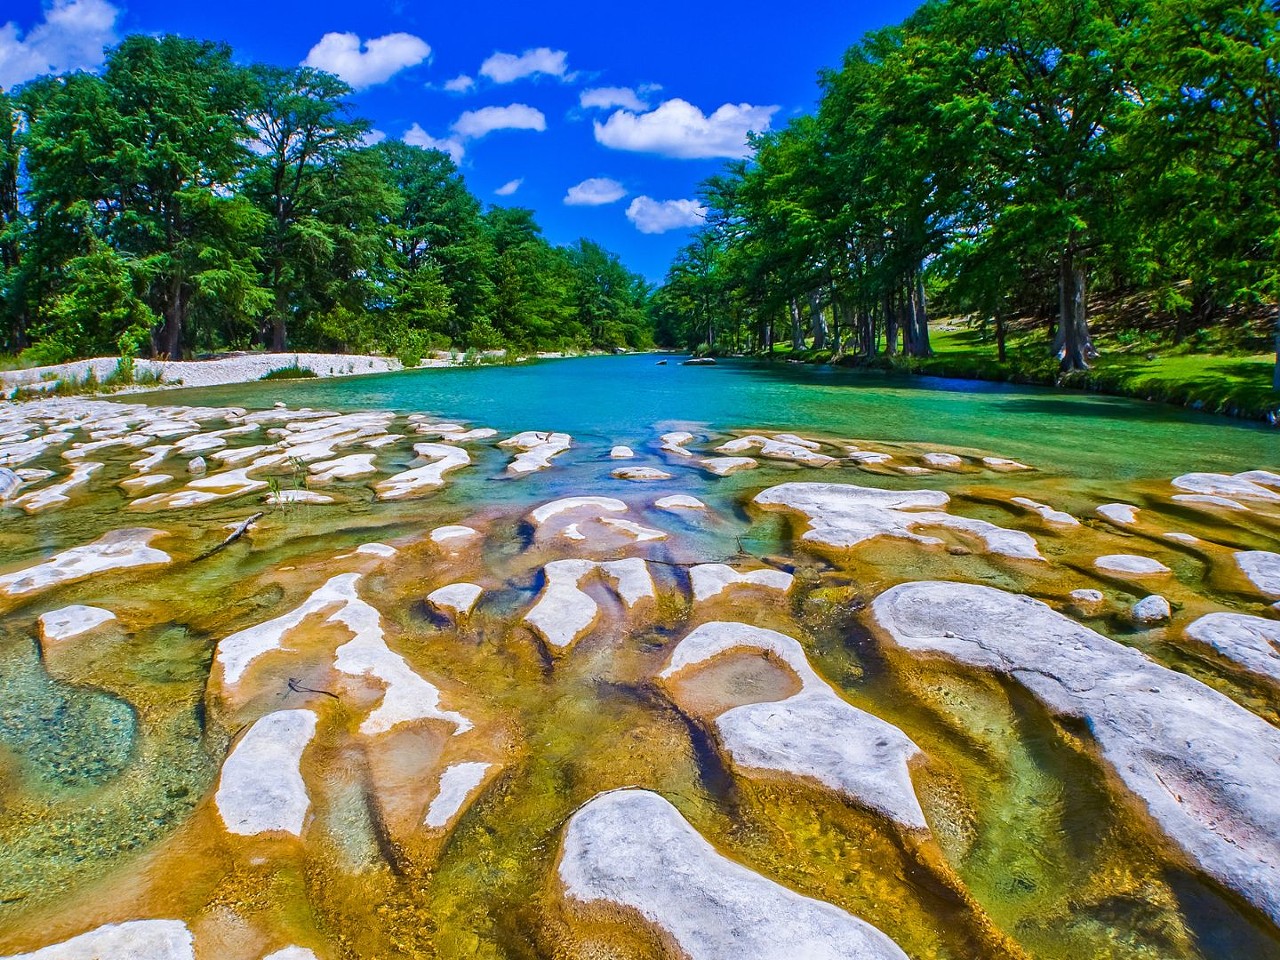 Garner State Park
234 RR 1050, Concan, (830) 232-6132, tpwd.texas.gov
Located along 2.9 miles of the Frio River, generations of Texans have spent their summer days at Garner State Park swimming or floating along to beat the blazing heat.